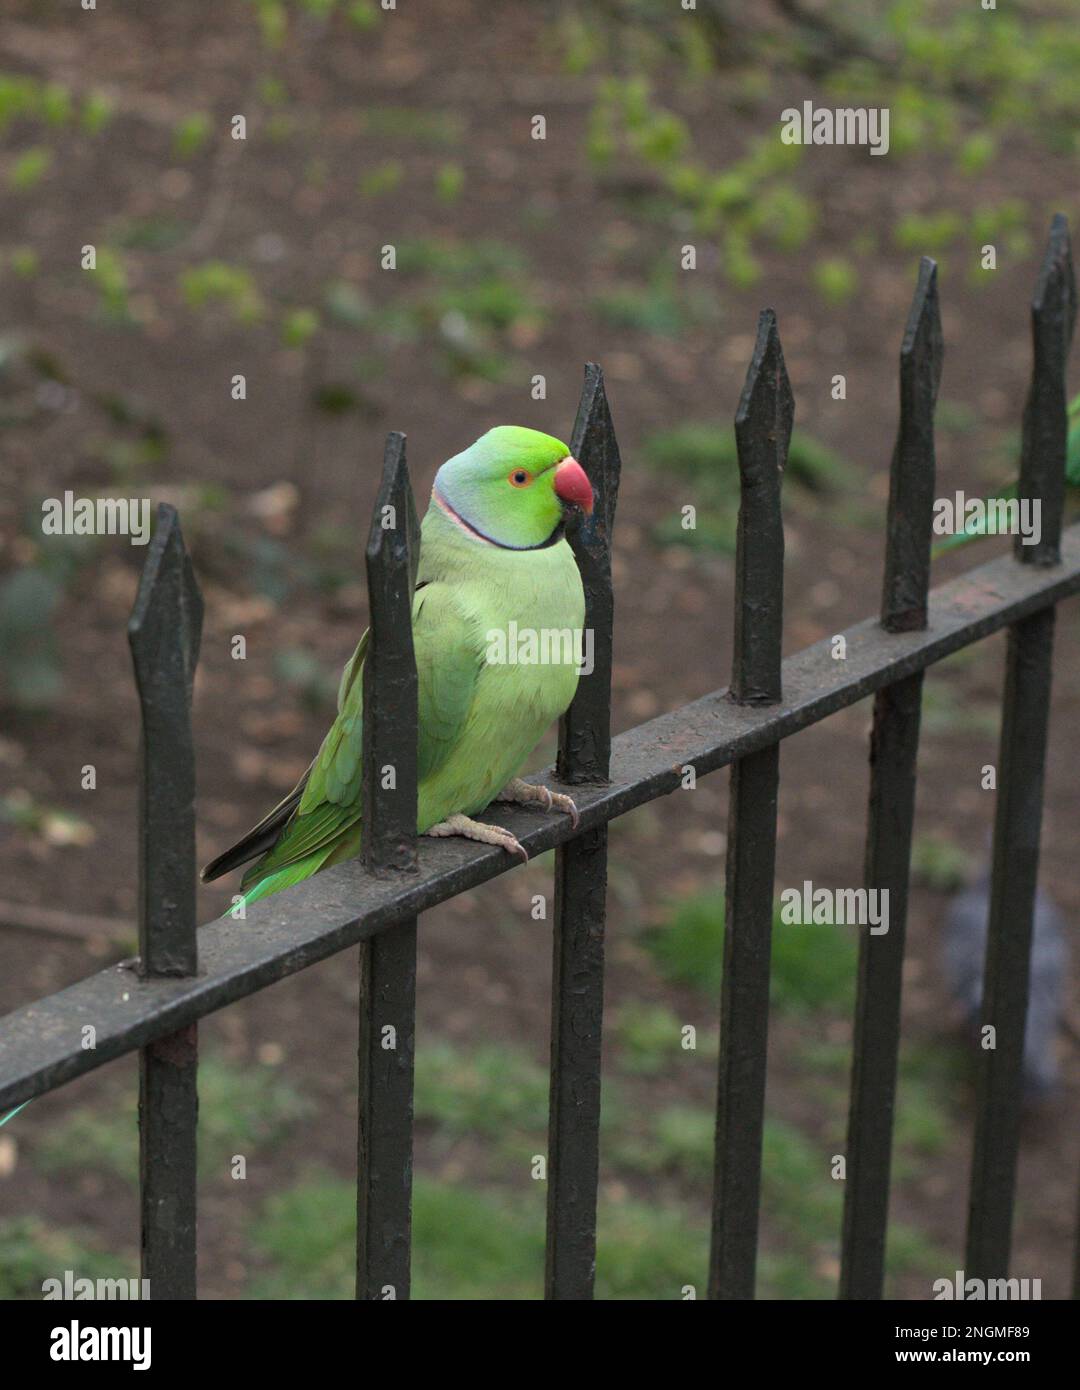 A small bird perches on a wooden fence, glancing to the side Stock Photo